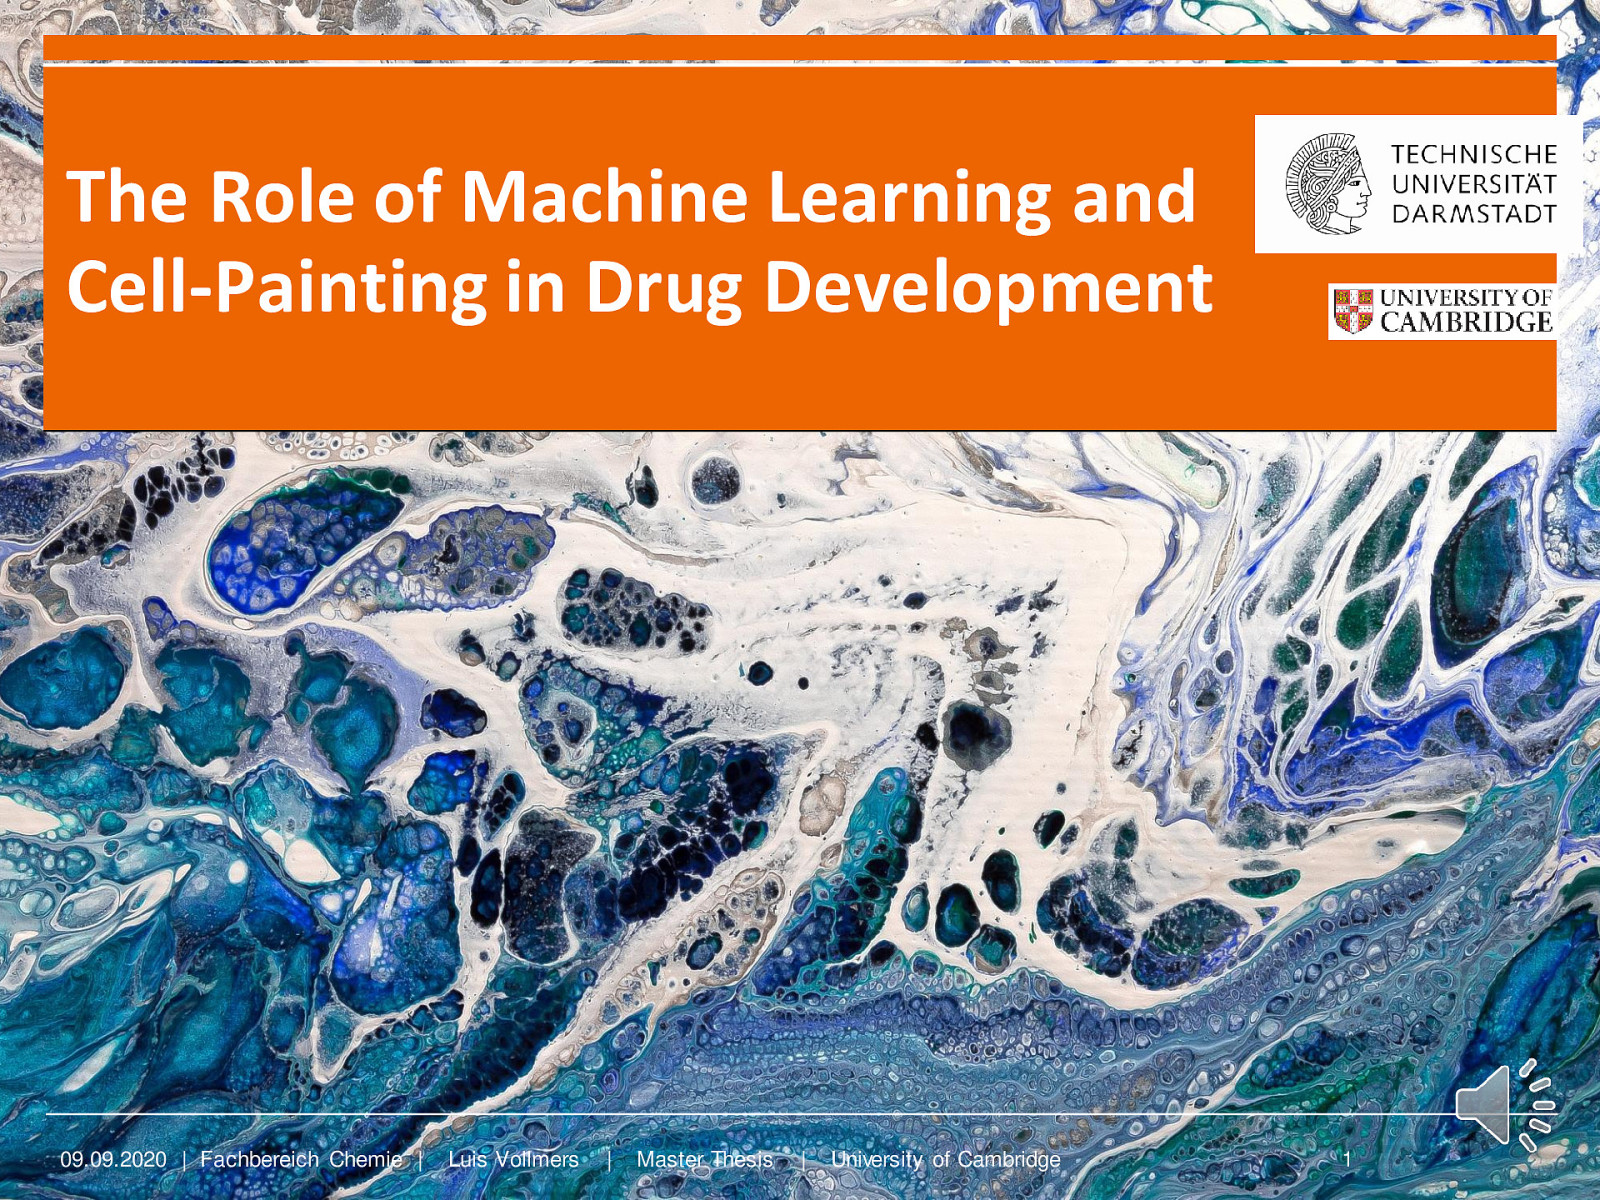 The Role of Machine Learning and Cell-Painting in Drug Development​